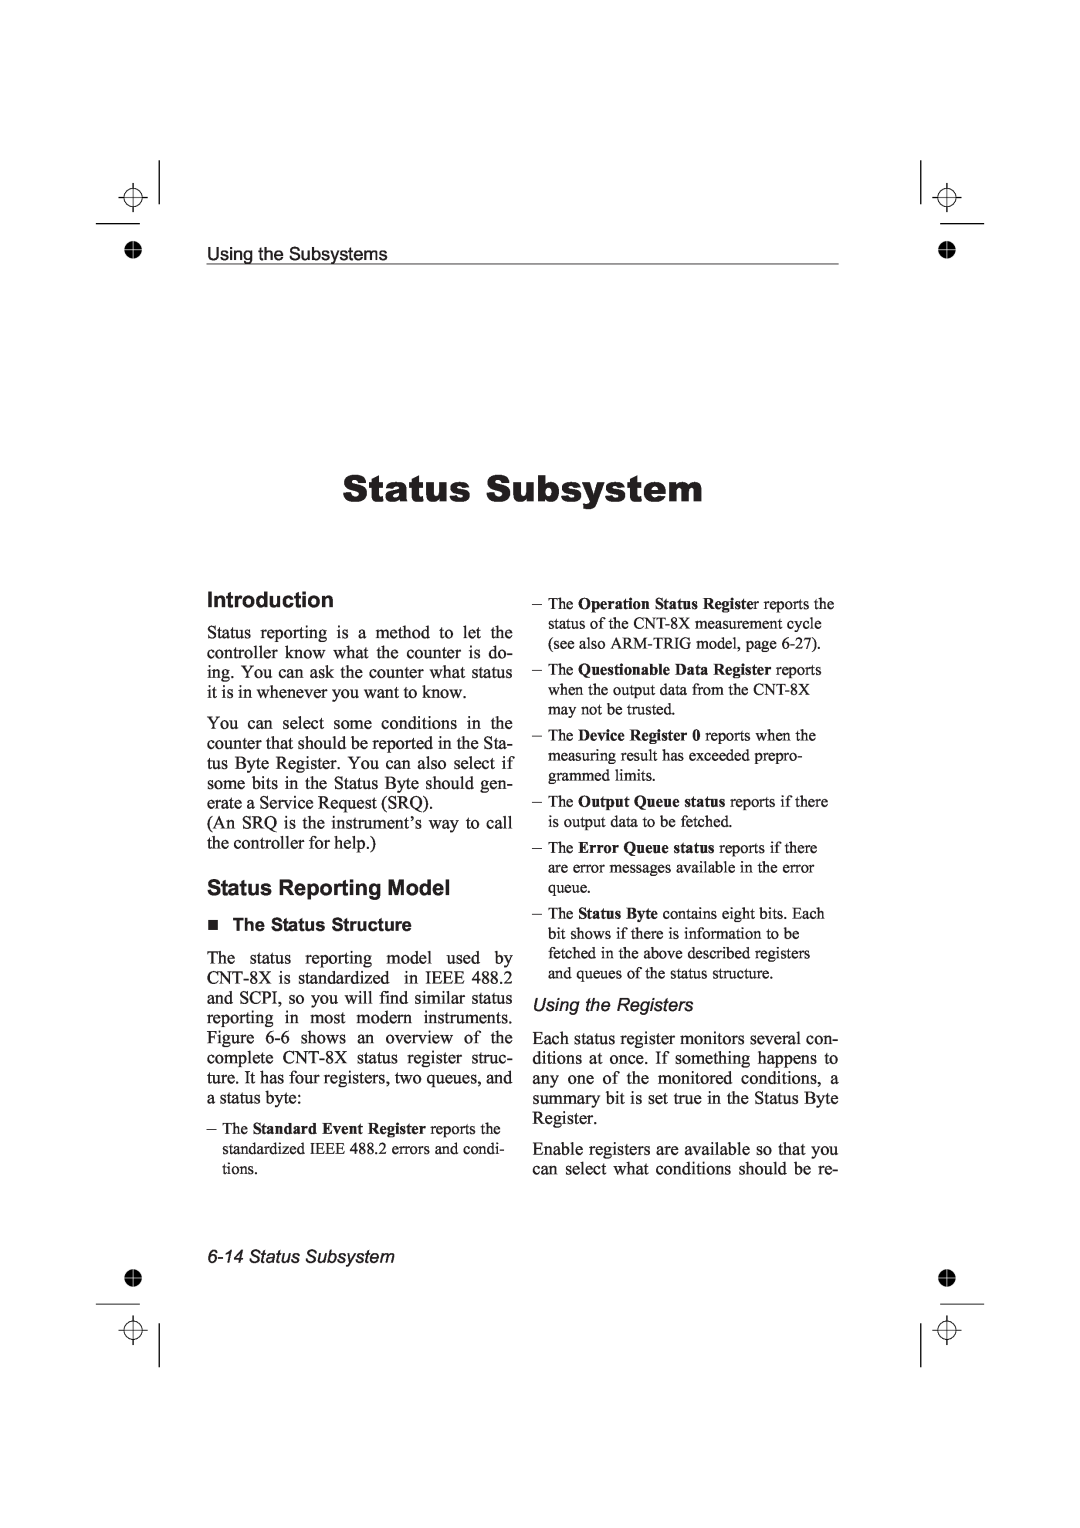 Fluke PM6685R, PM6681R Status Subsystem, Status Reporting Model, Introduction, The Status Structure, Using the Registers 